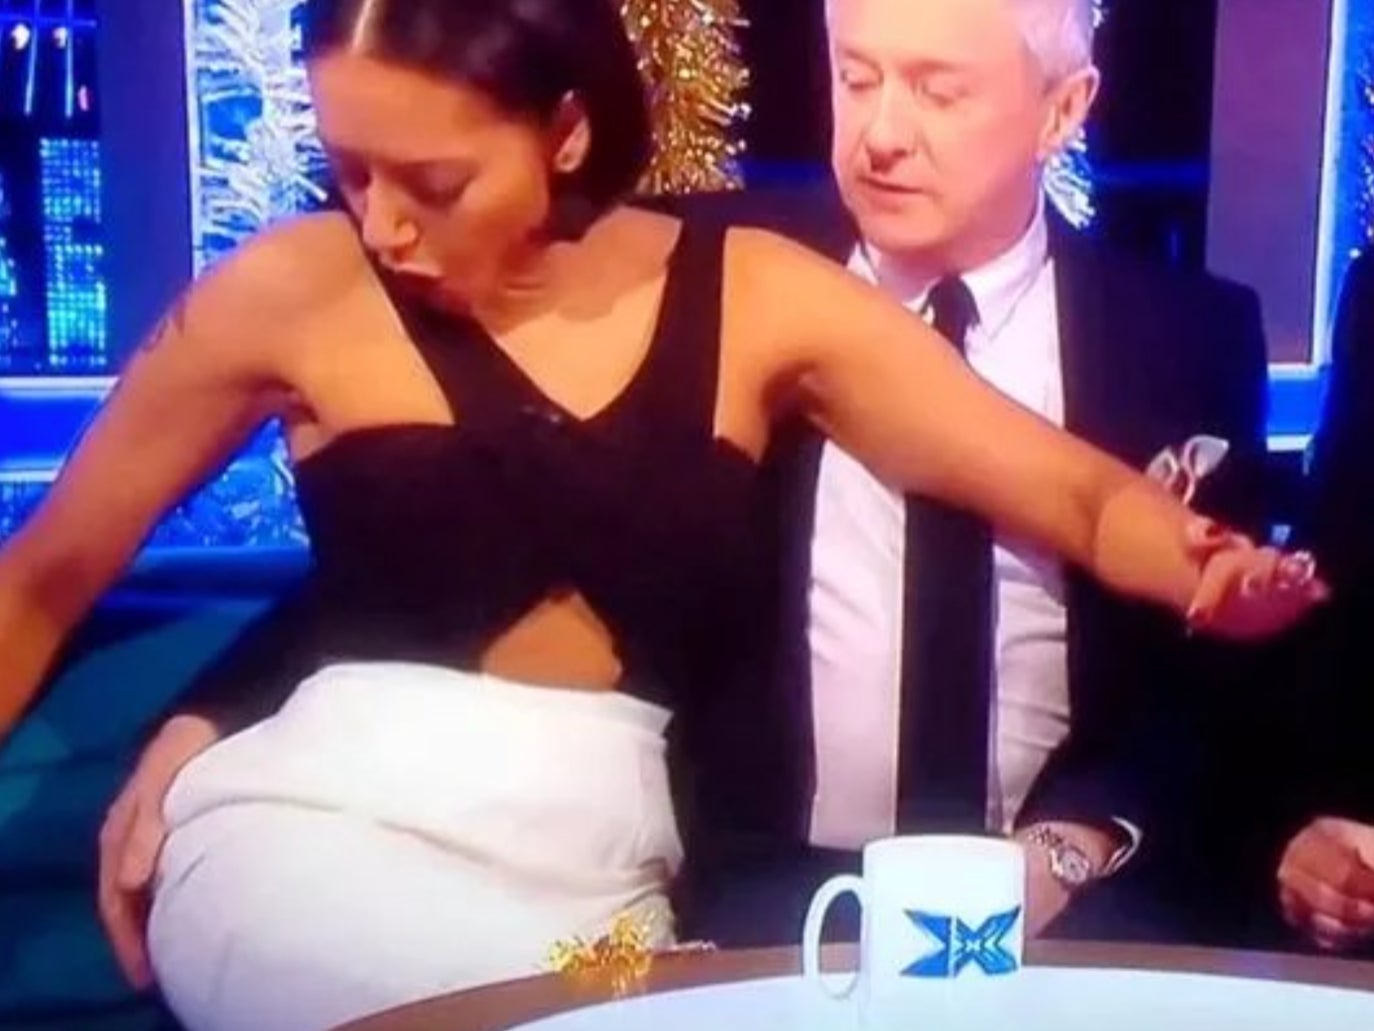 Louis Walsh touched Mel B inappropriately on ‘The Xtra Factor’ in 2014